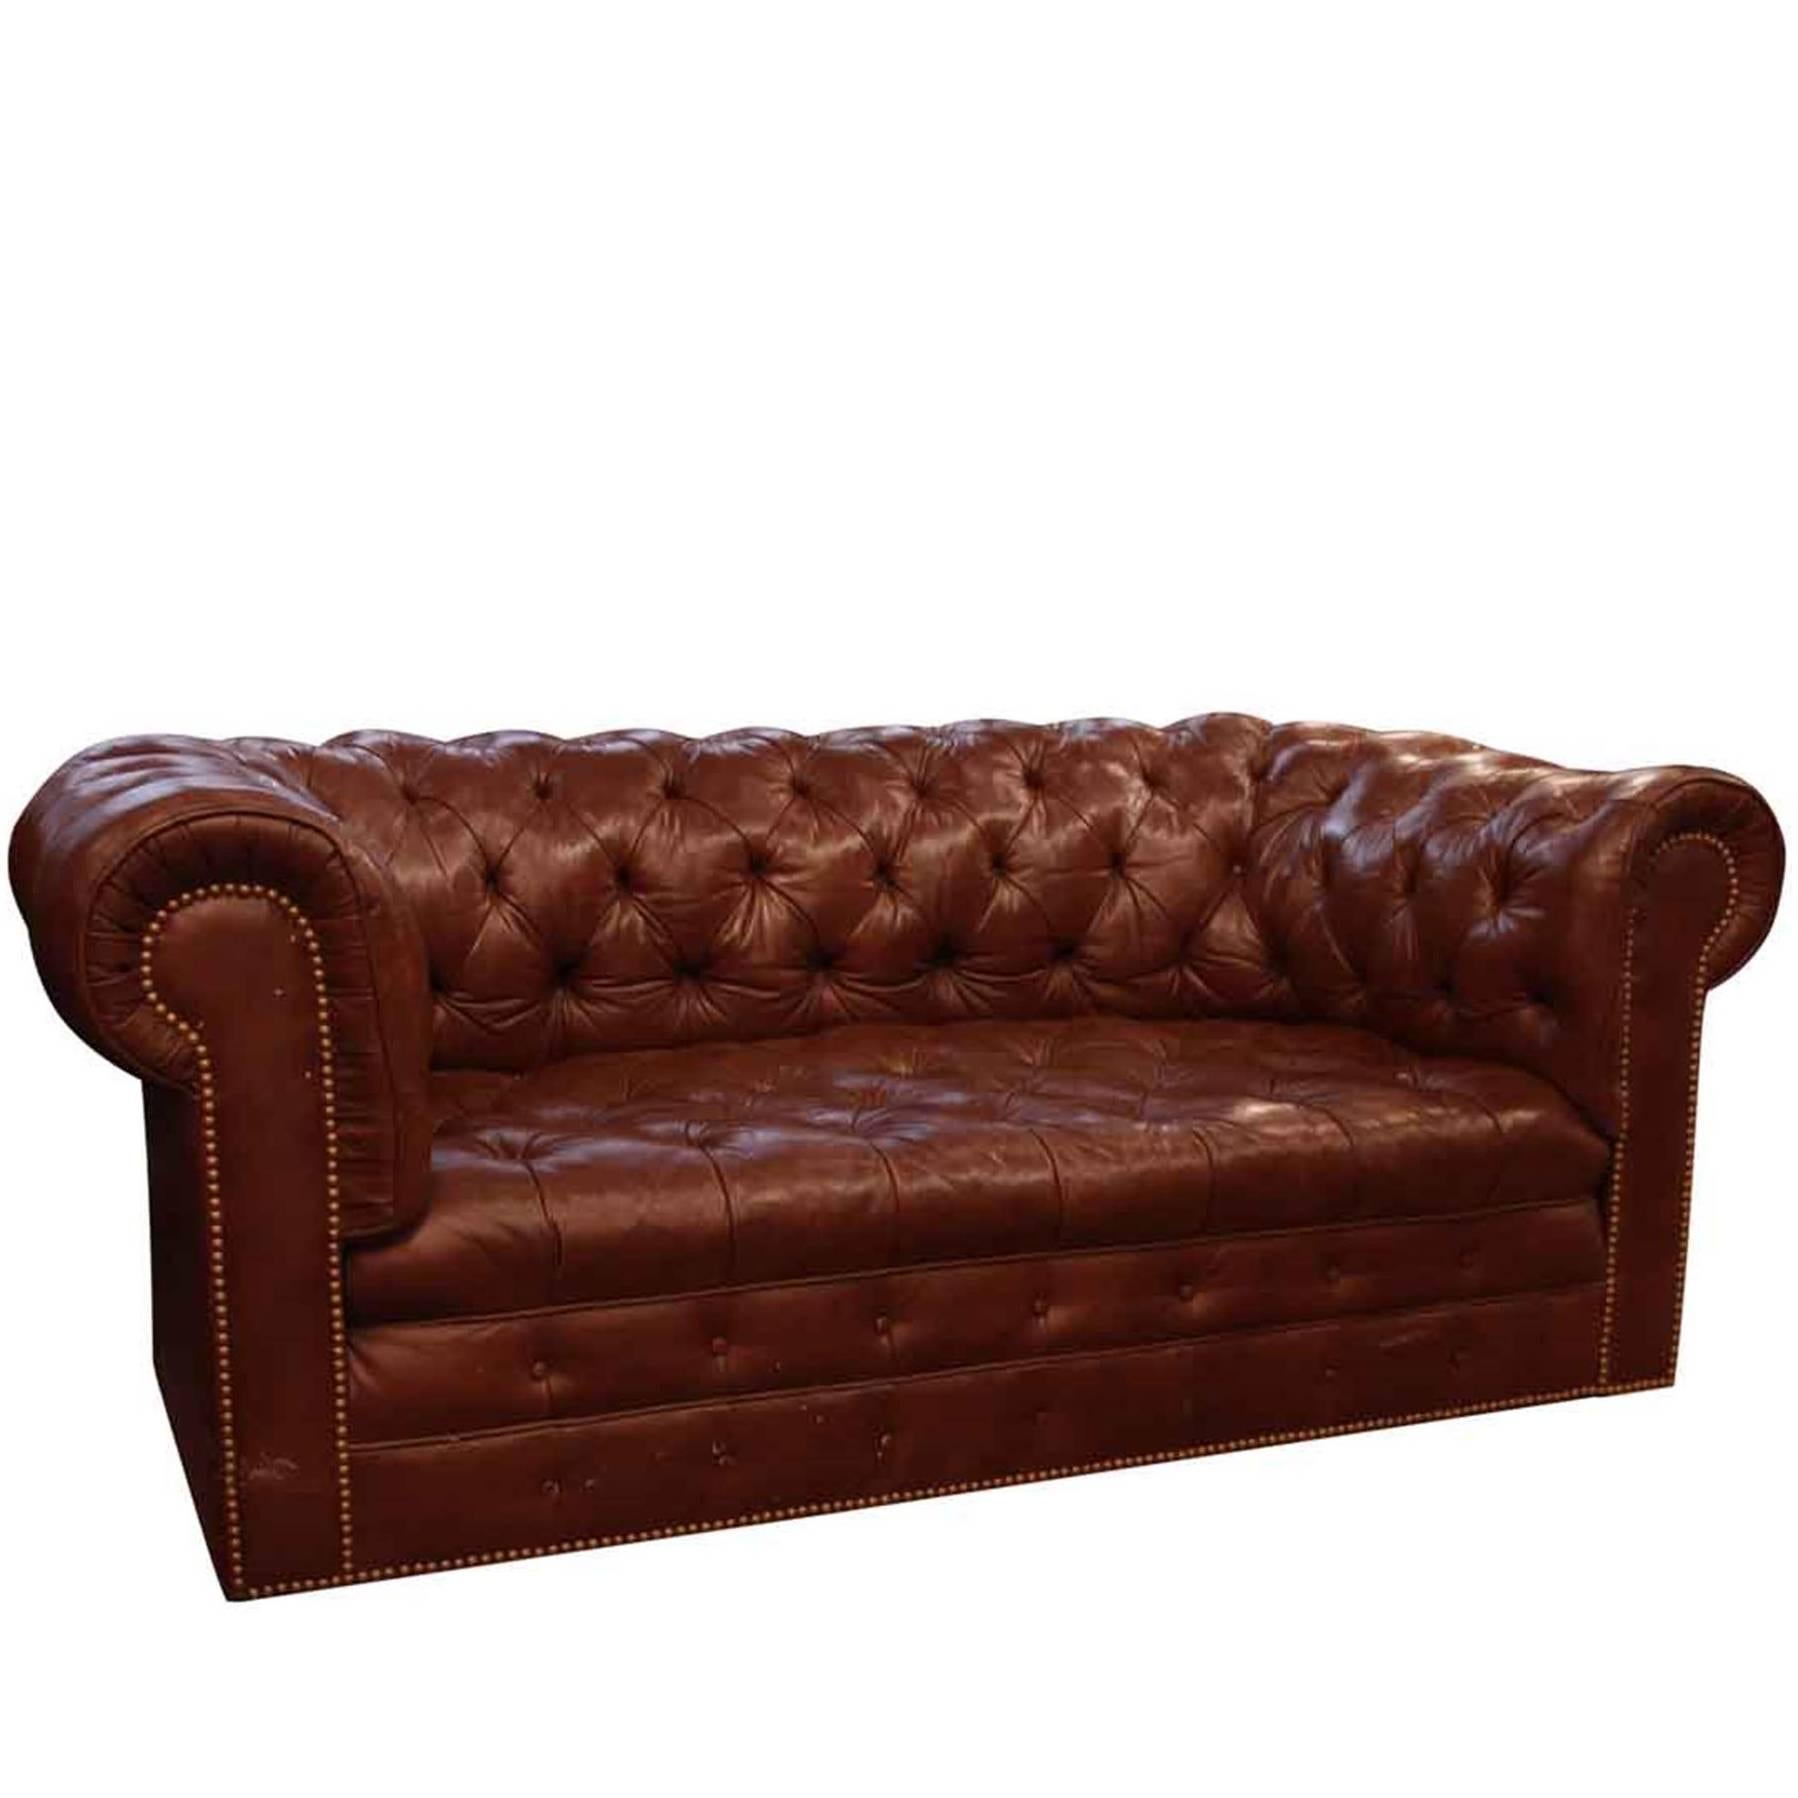 1970s Brown Chesterfield Leather Sofa with Brass Rivets by Hancock & Moore